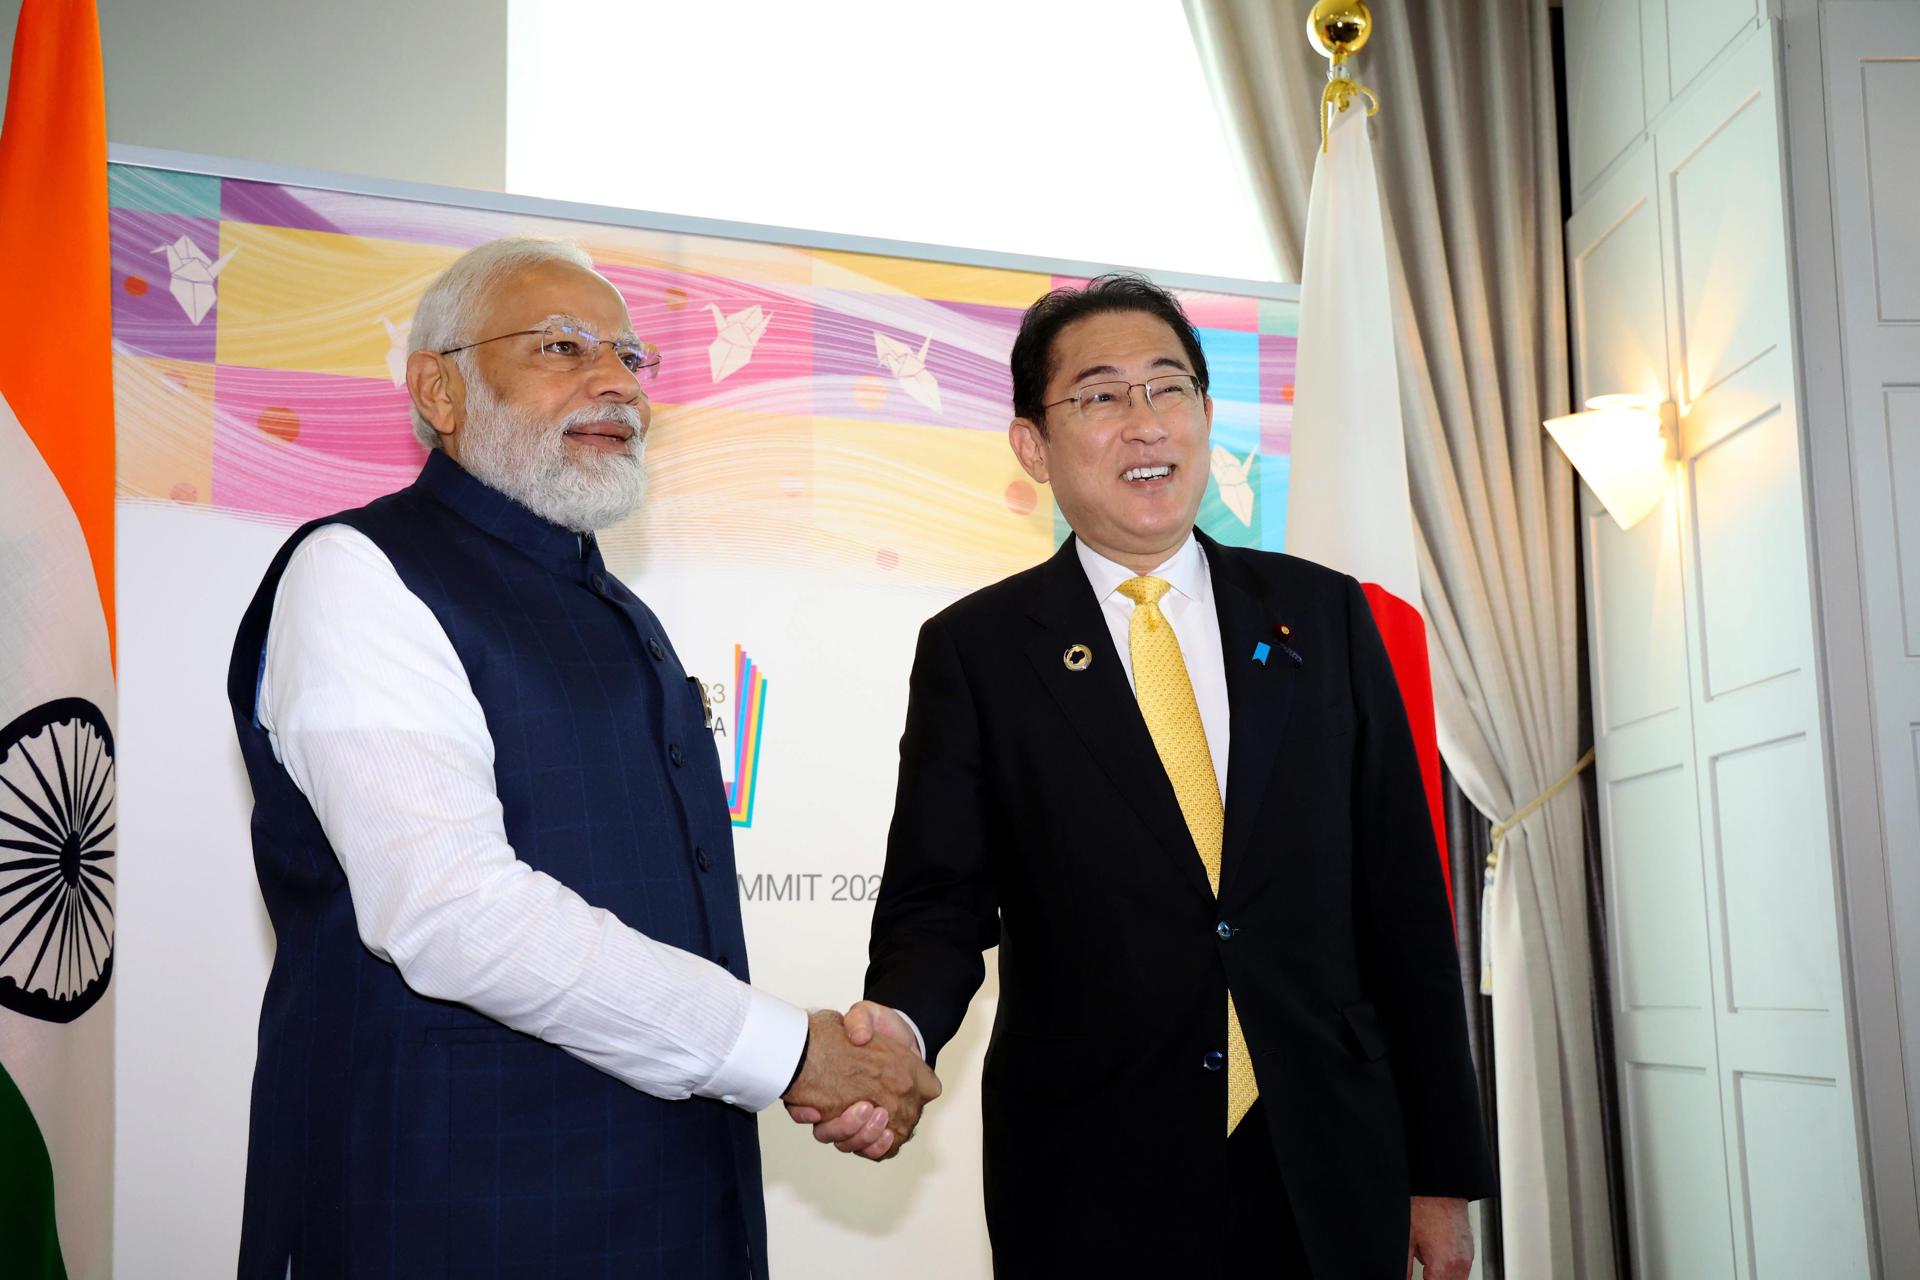 India's Prime Minister Narendra Modi (L) and Japan's Prime Minister Fumio Kishida shake hands during a bilateral meeting on the sidelines of the G7 Hiroshima Summit in Hiroshima, Japan, 20 May 2023. EFE/EPA/JAPAN POOL JAPAN OUT EDITORIAL USE ONLY/NO SALES